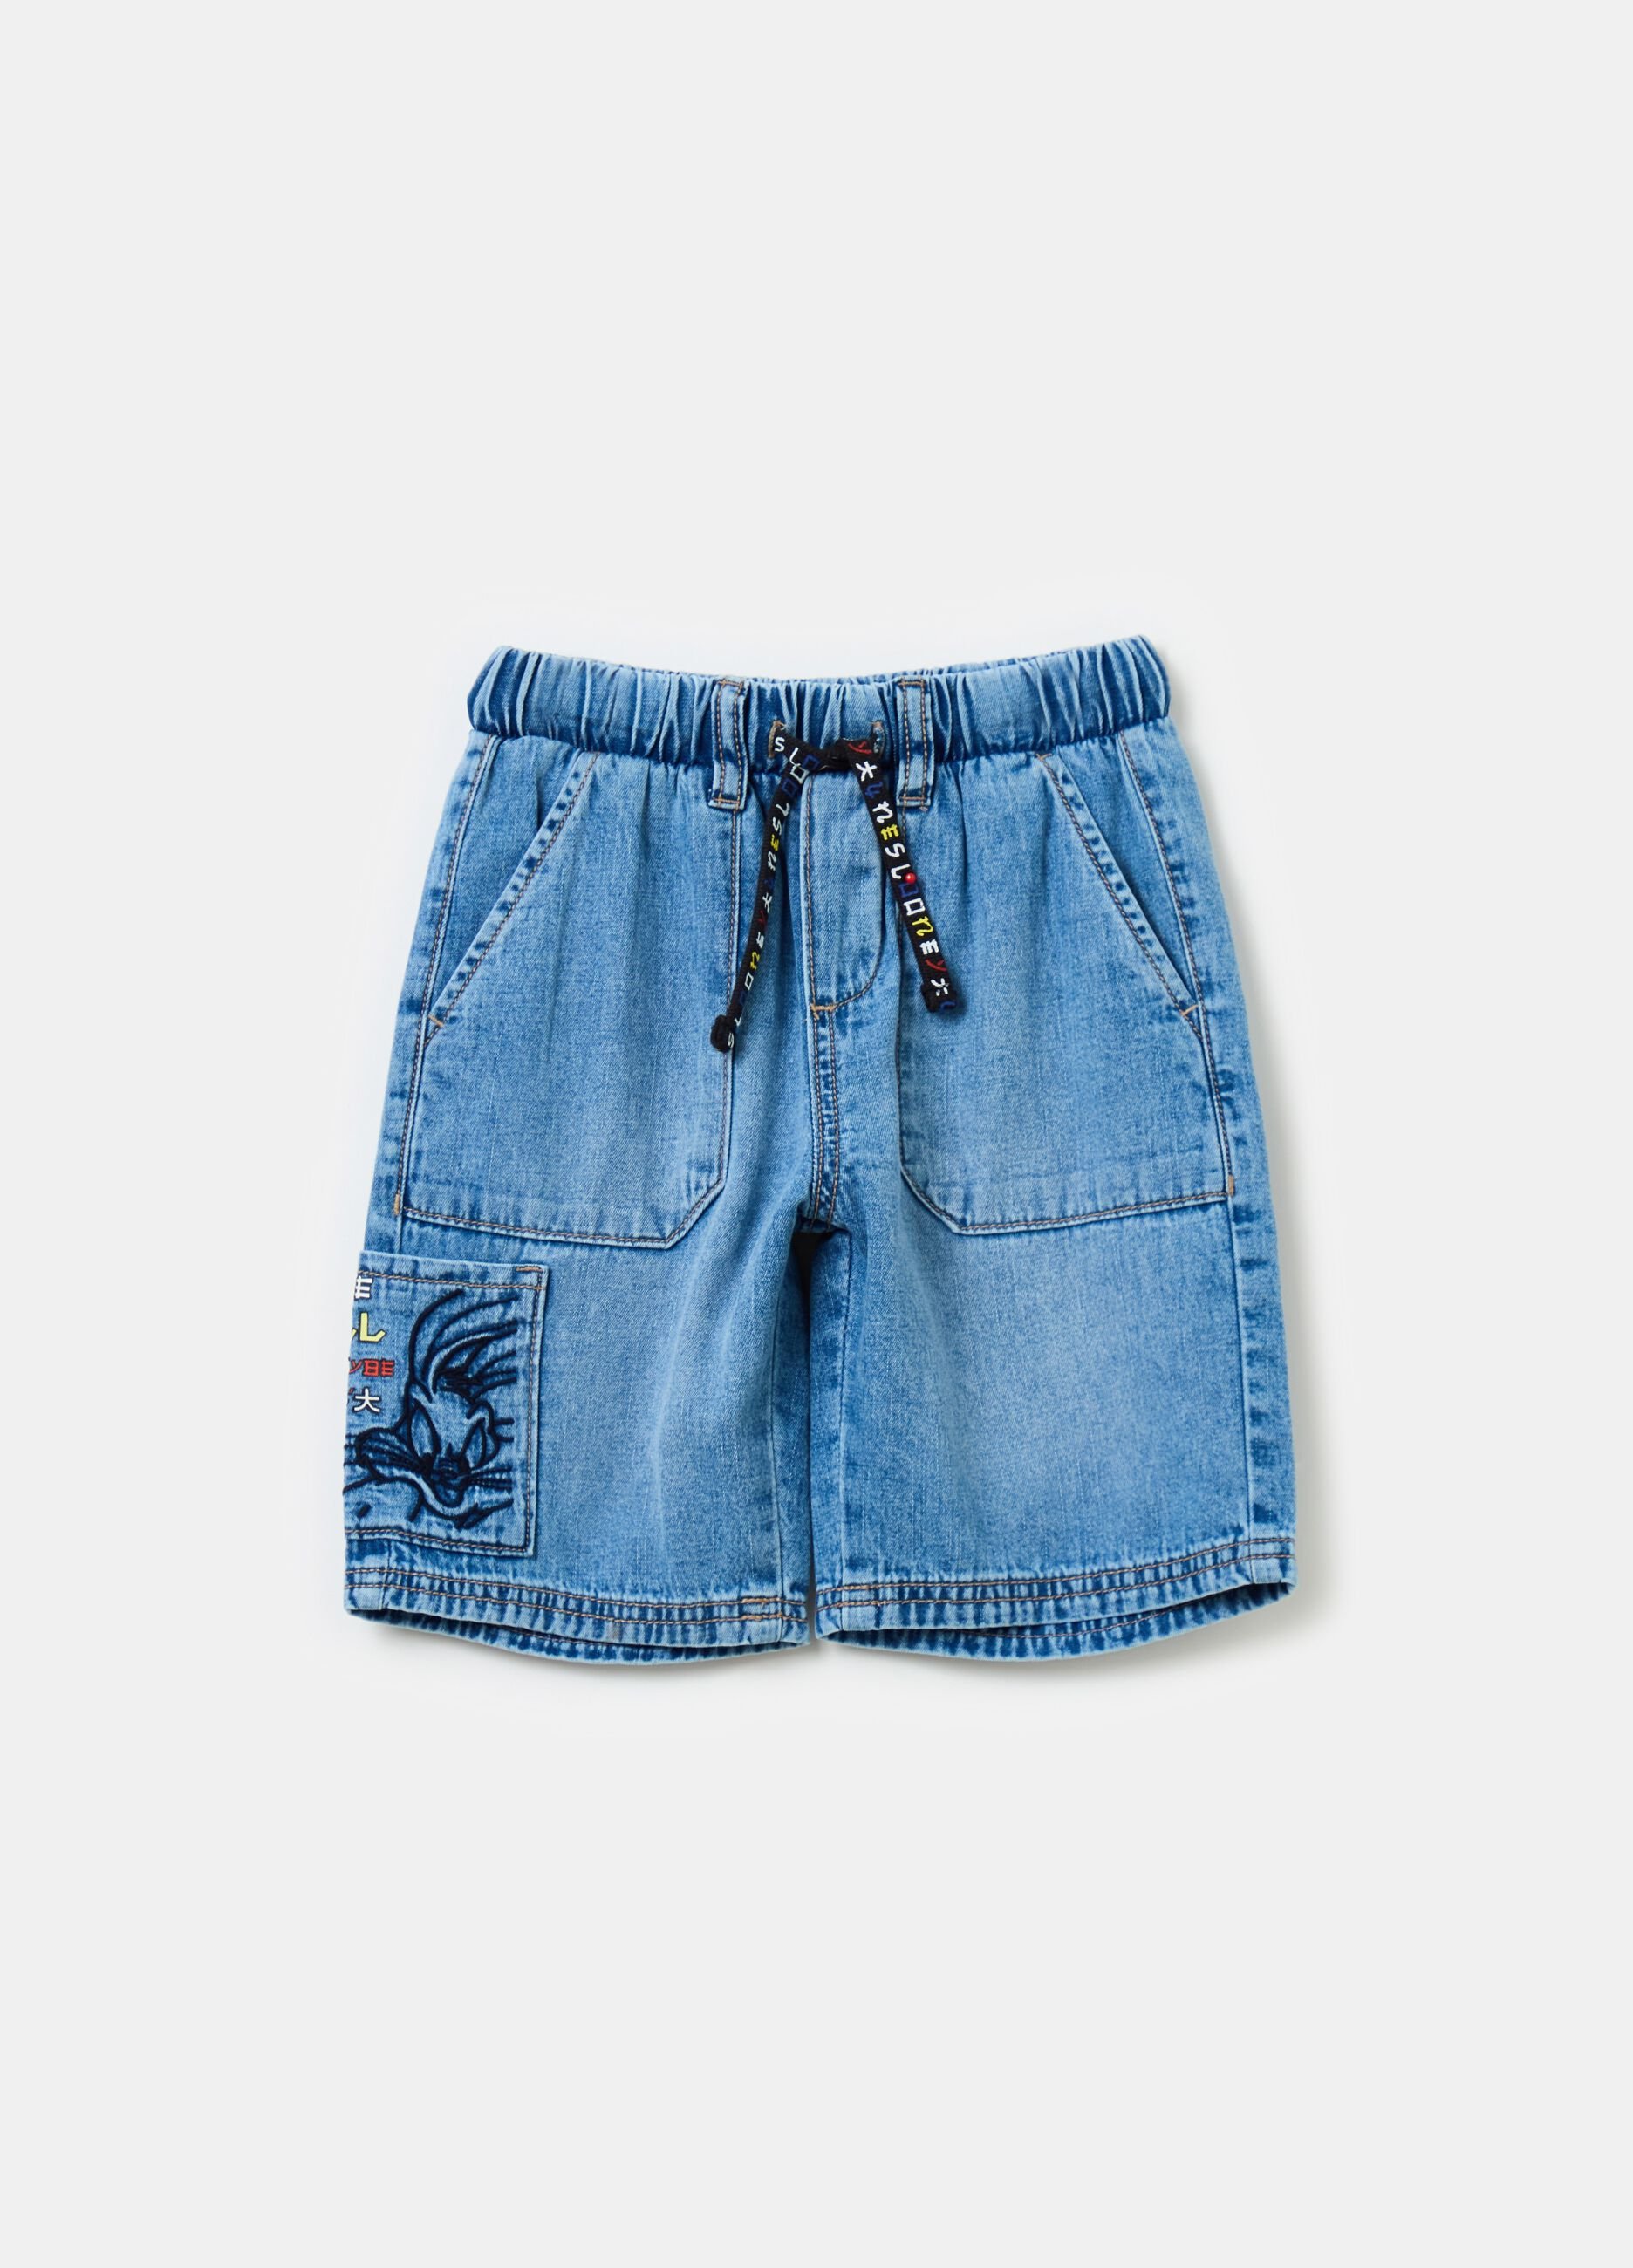 Denim Bermuda shorts with Bugs Bunny embroidery